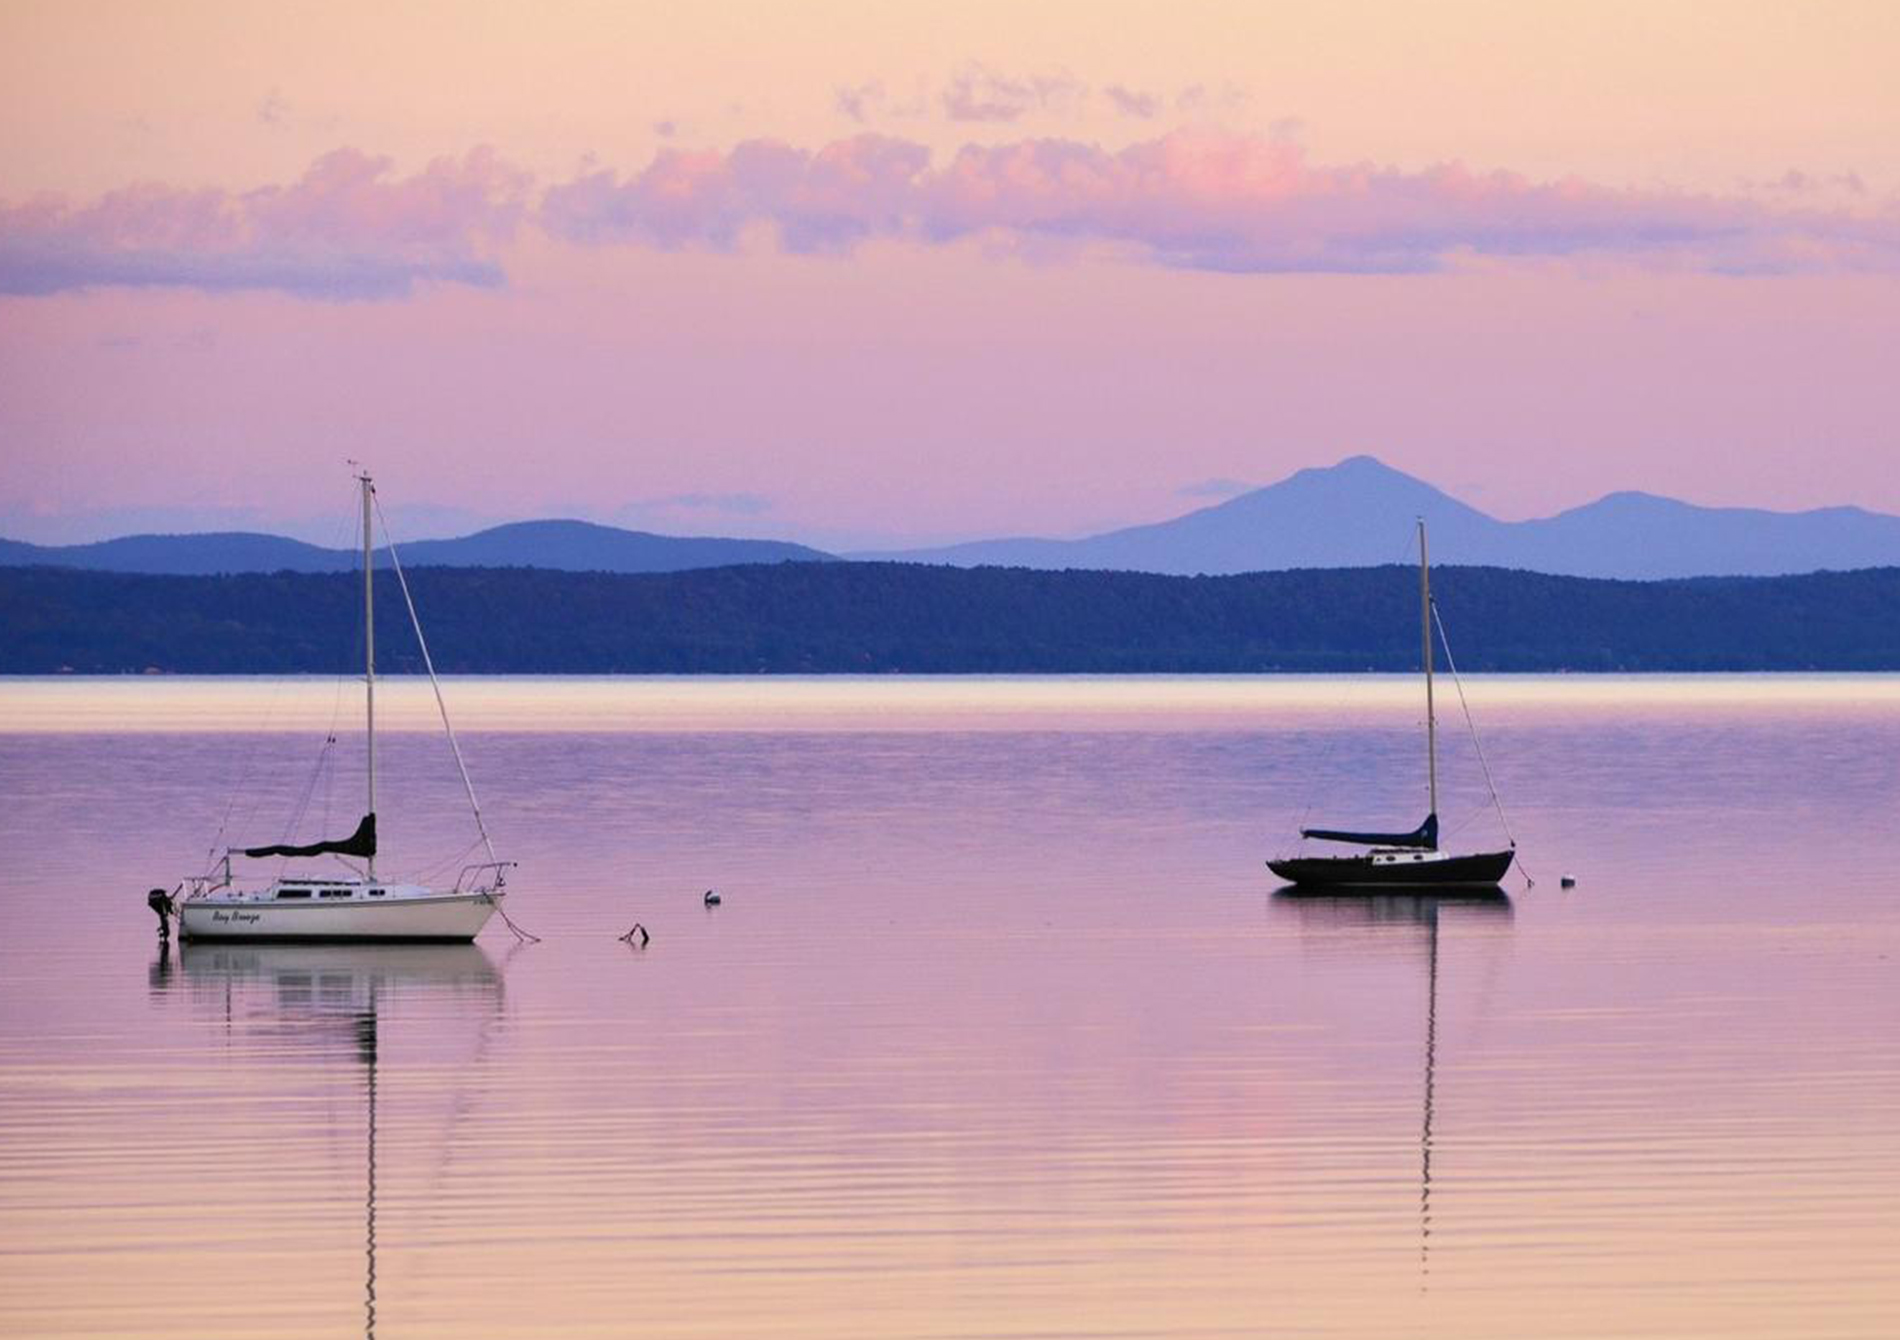 Lake Champlain is loaded with pleasures on both sides and 